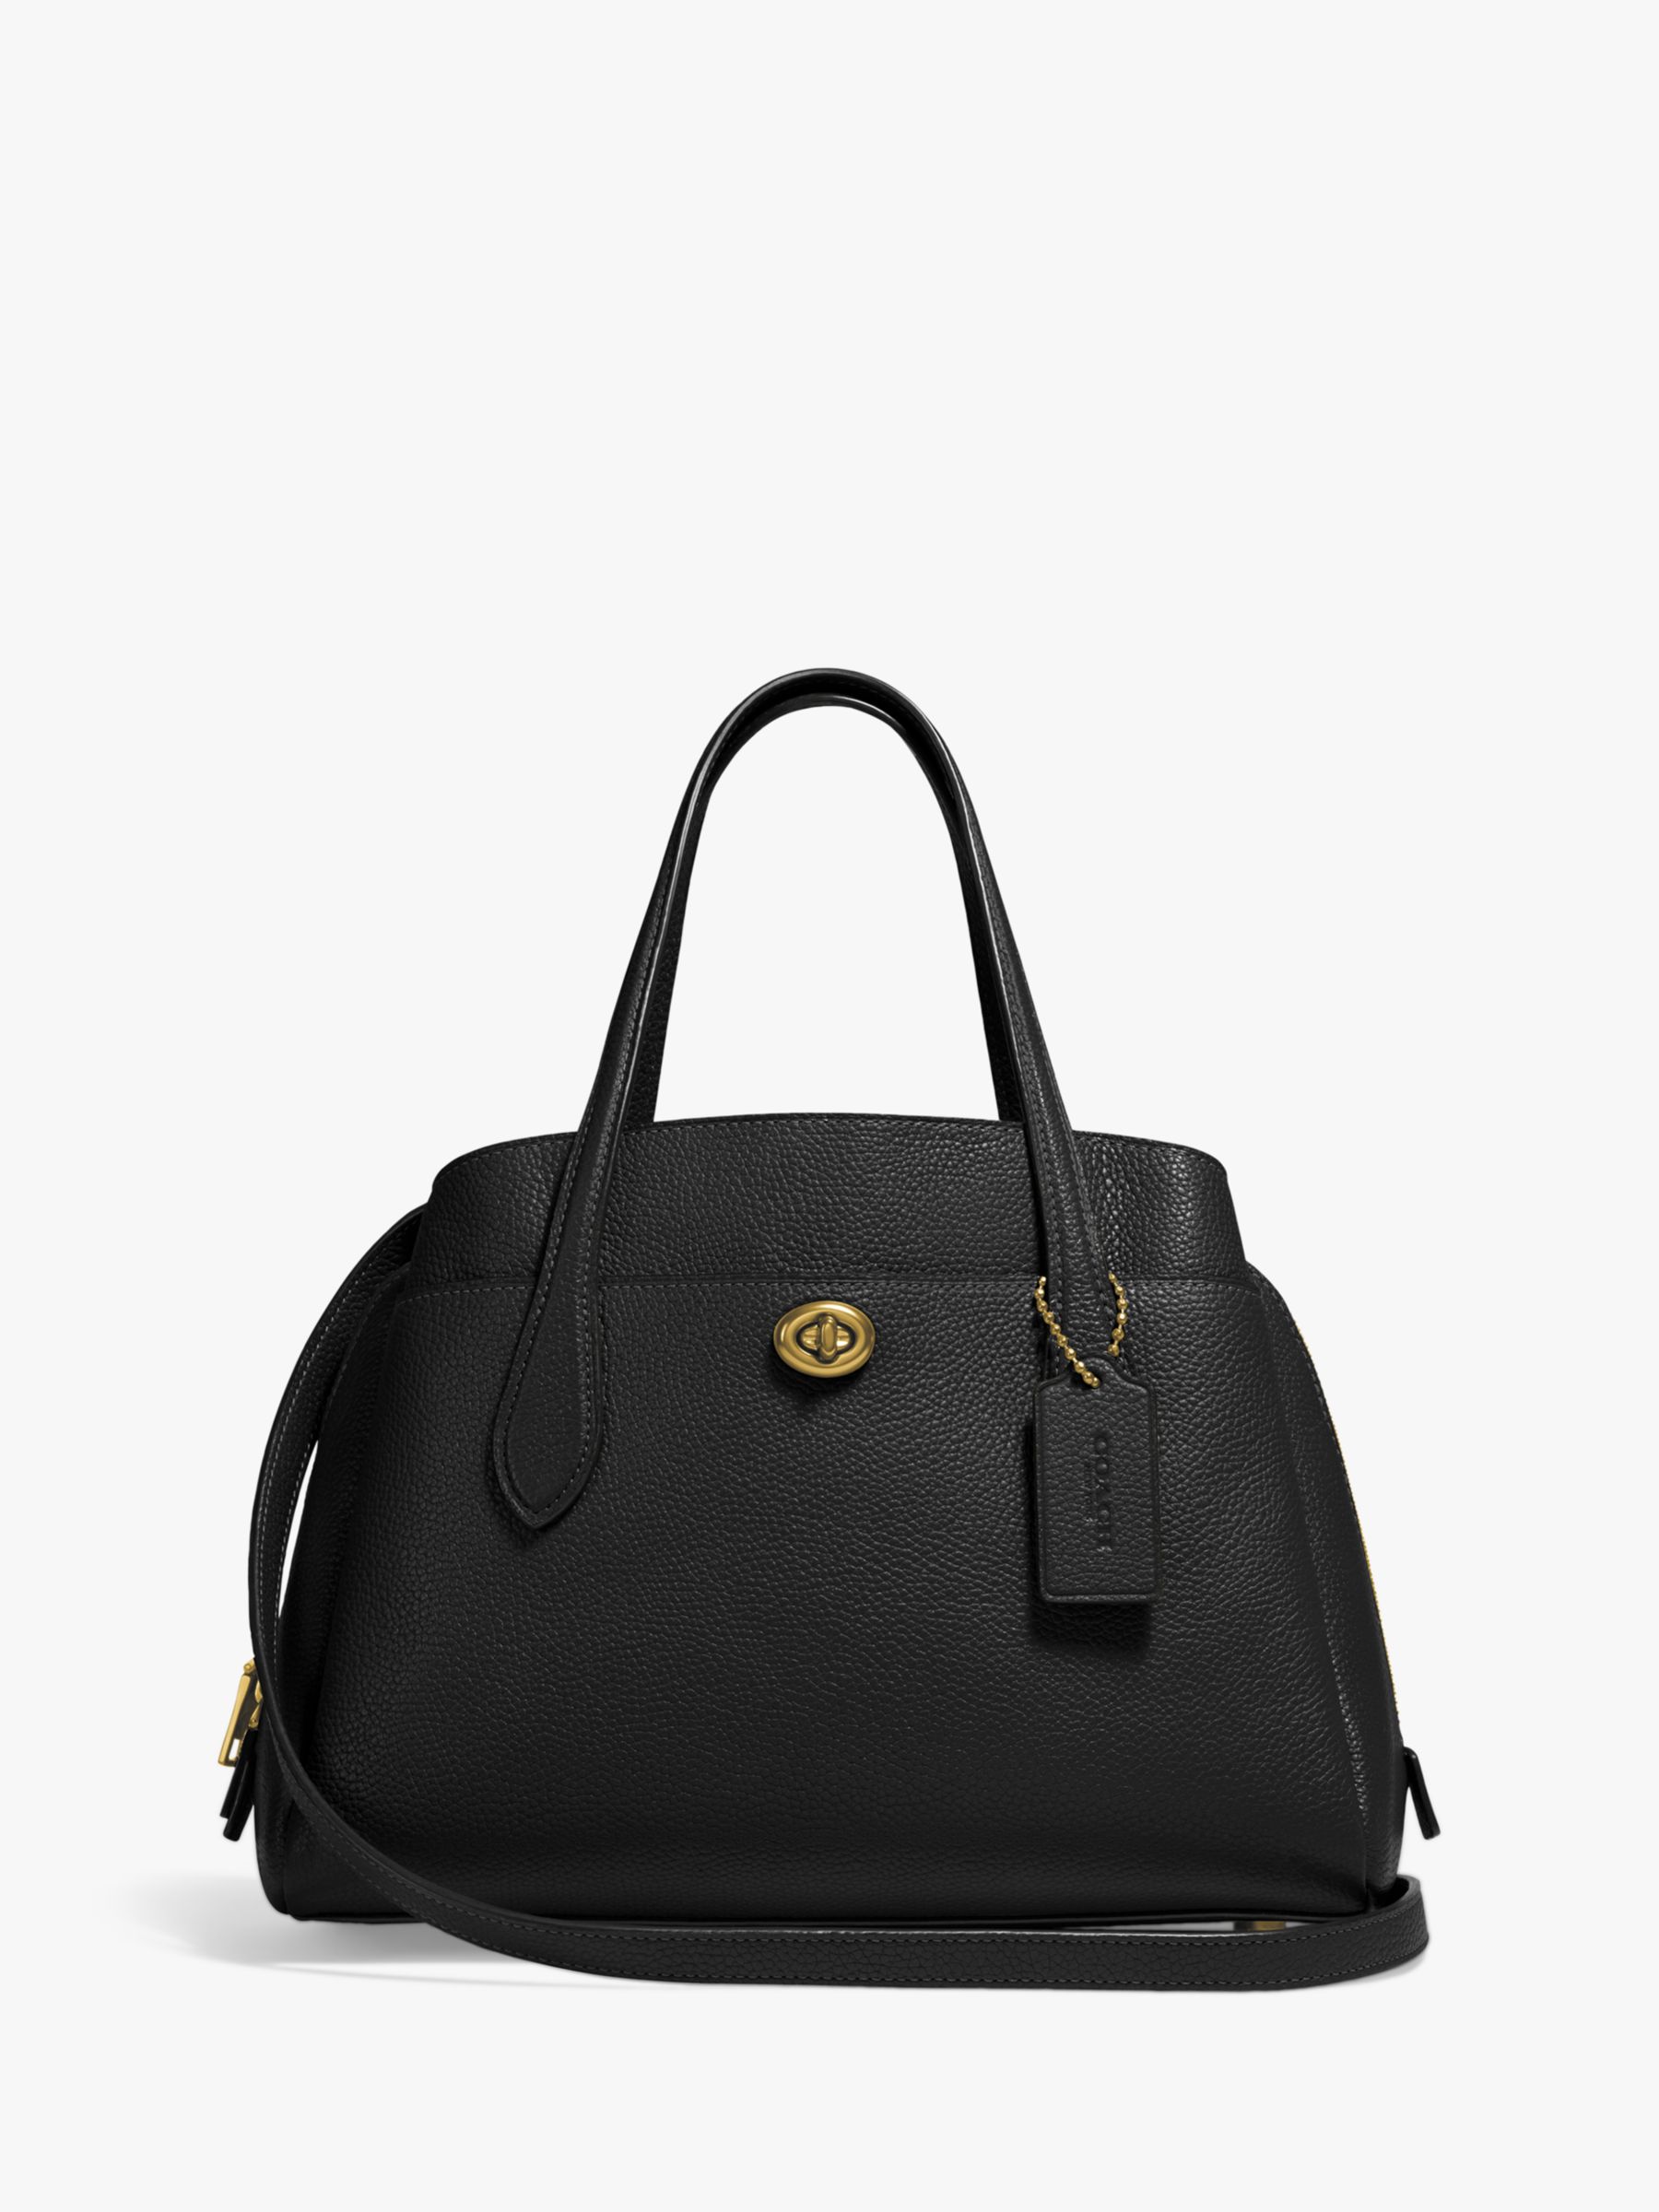 Coach Lora 30 Leather Carryall Tote Bag, Black at John Lewis & Partners